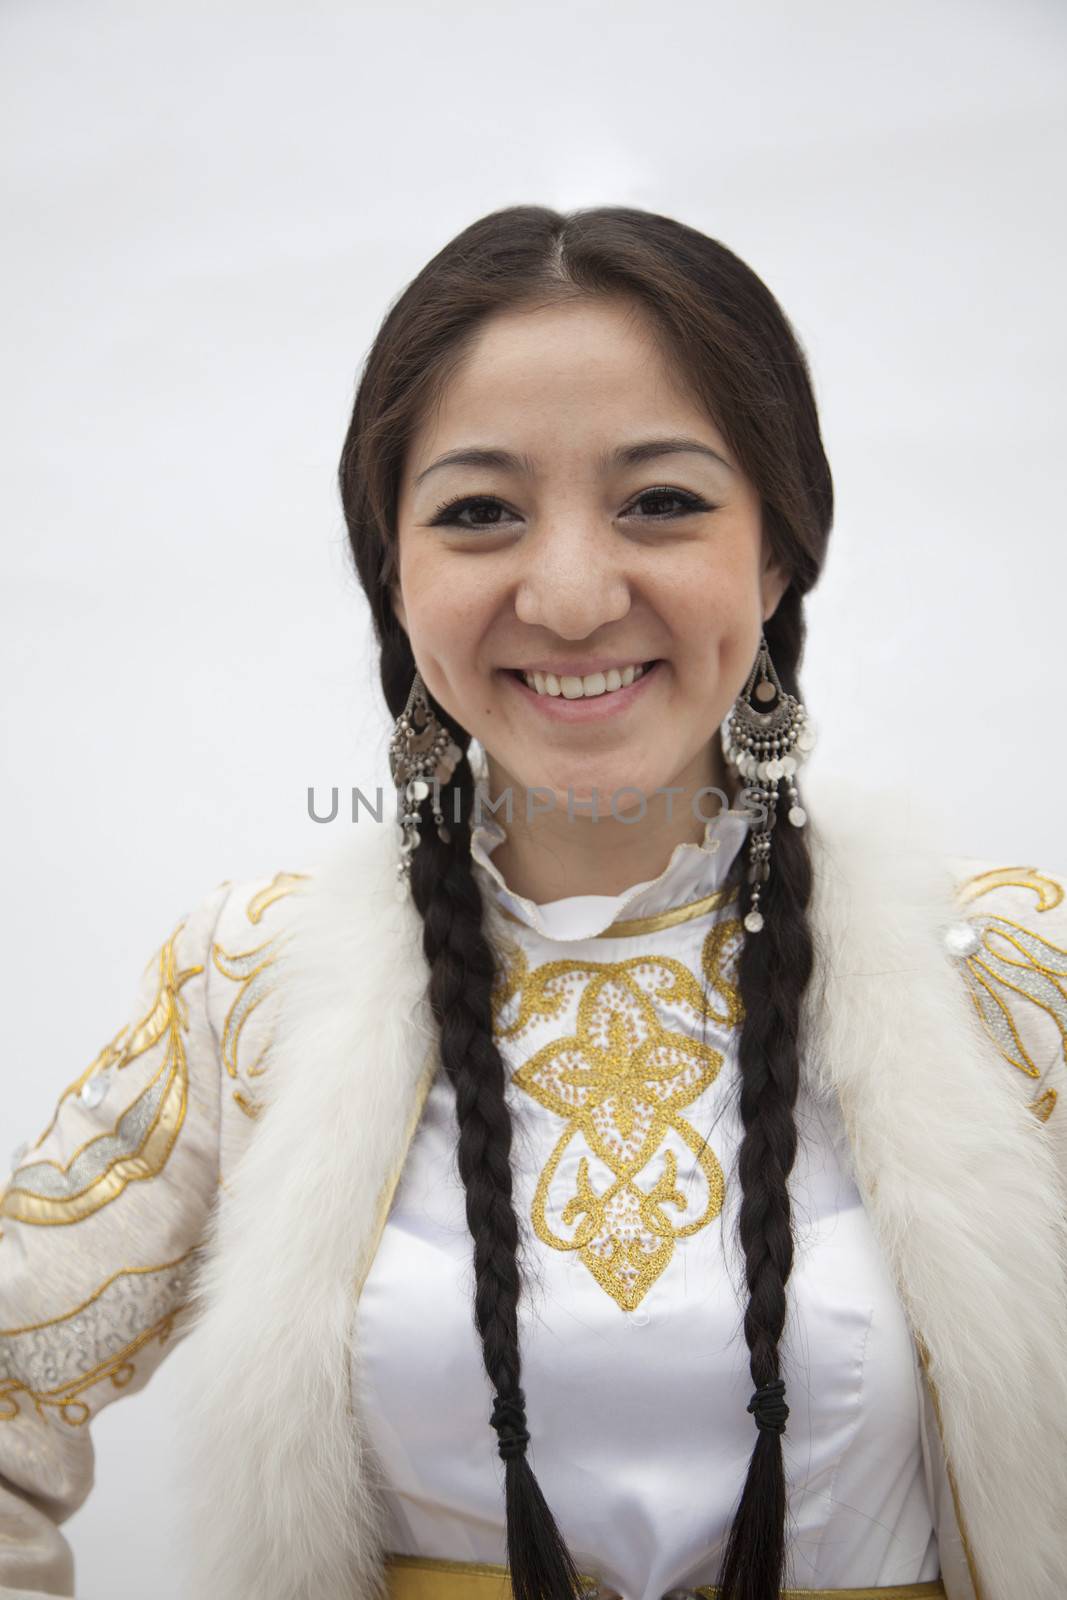 Portrait of young smiling woman with braids in traditional clothing from Kazakhstan, studio shot by XiXinXing